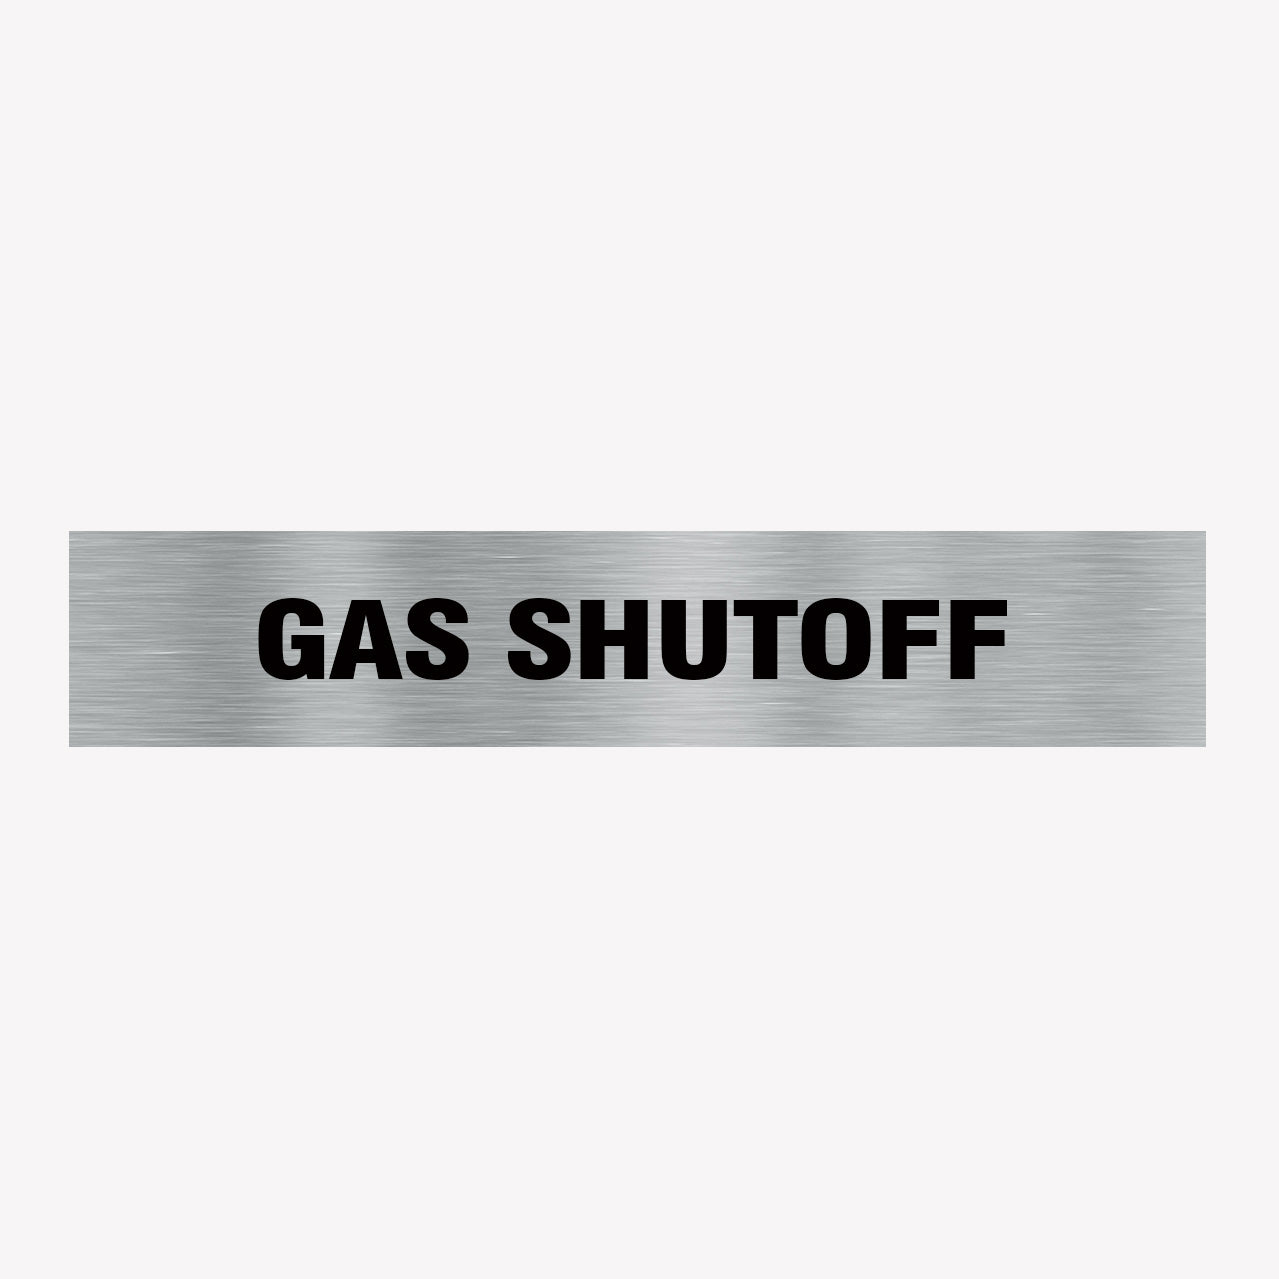 GAS SHUTOFF SIGN - STATUTORY SIGNS IN AUSTRALIA - FAST SHIPPING  - SHOP ONLINE AT GET SIGNS